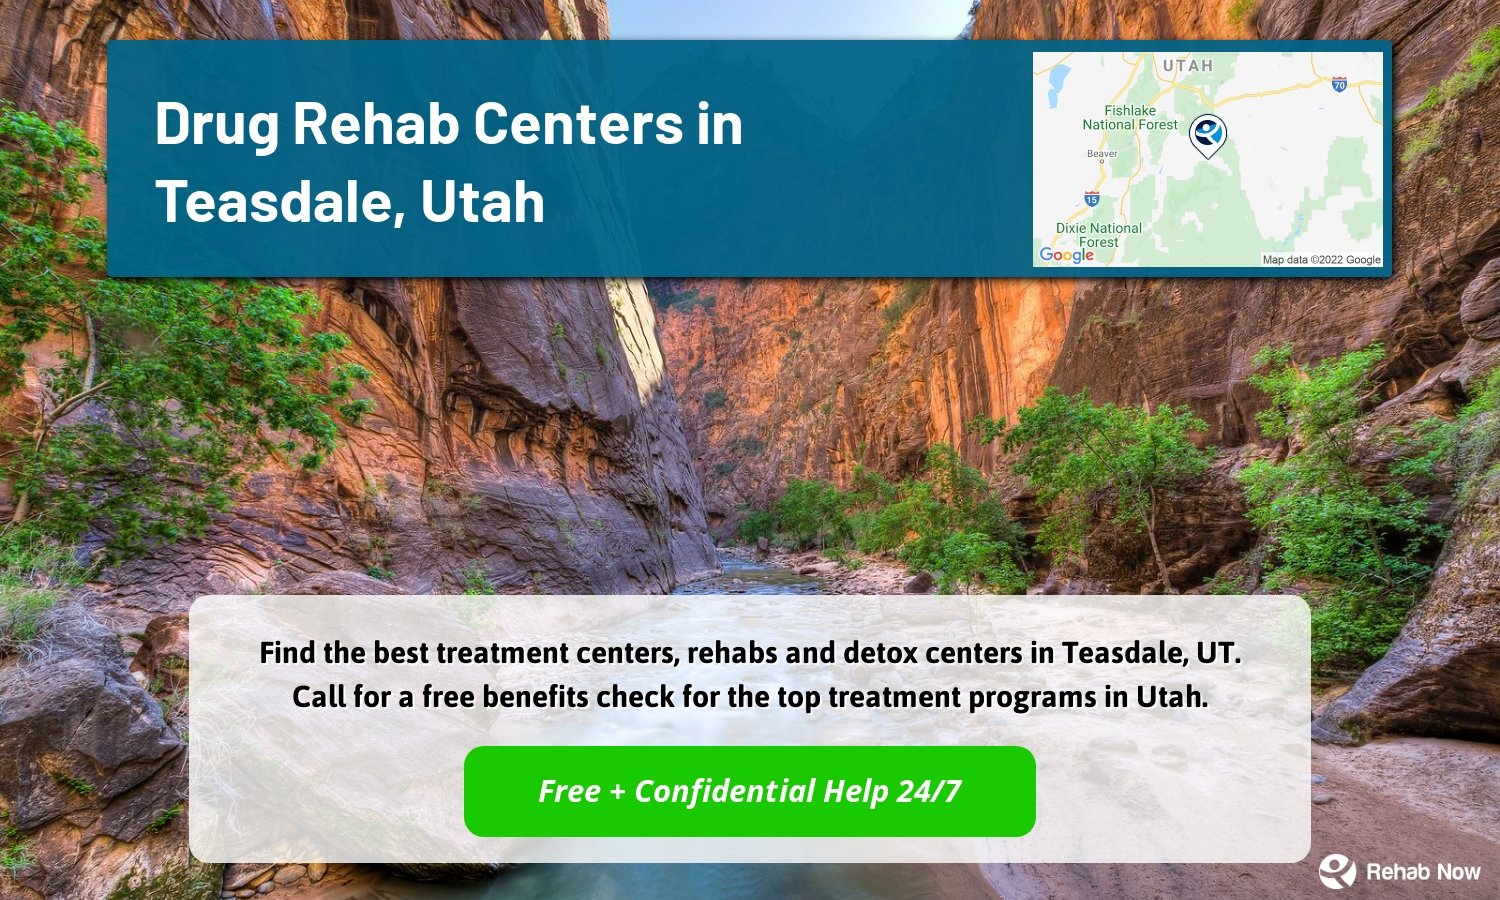 Find the best treatment centers, rehabs and detox centers in Teasdale, UT. Call for a free benefits check for the top treatment programs in Utah.